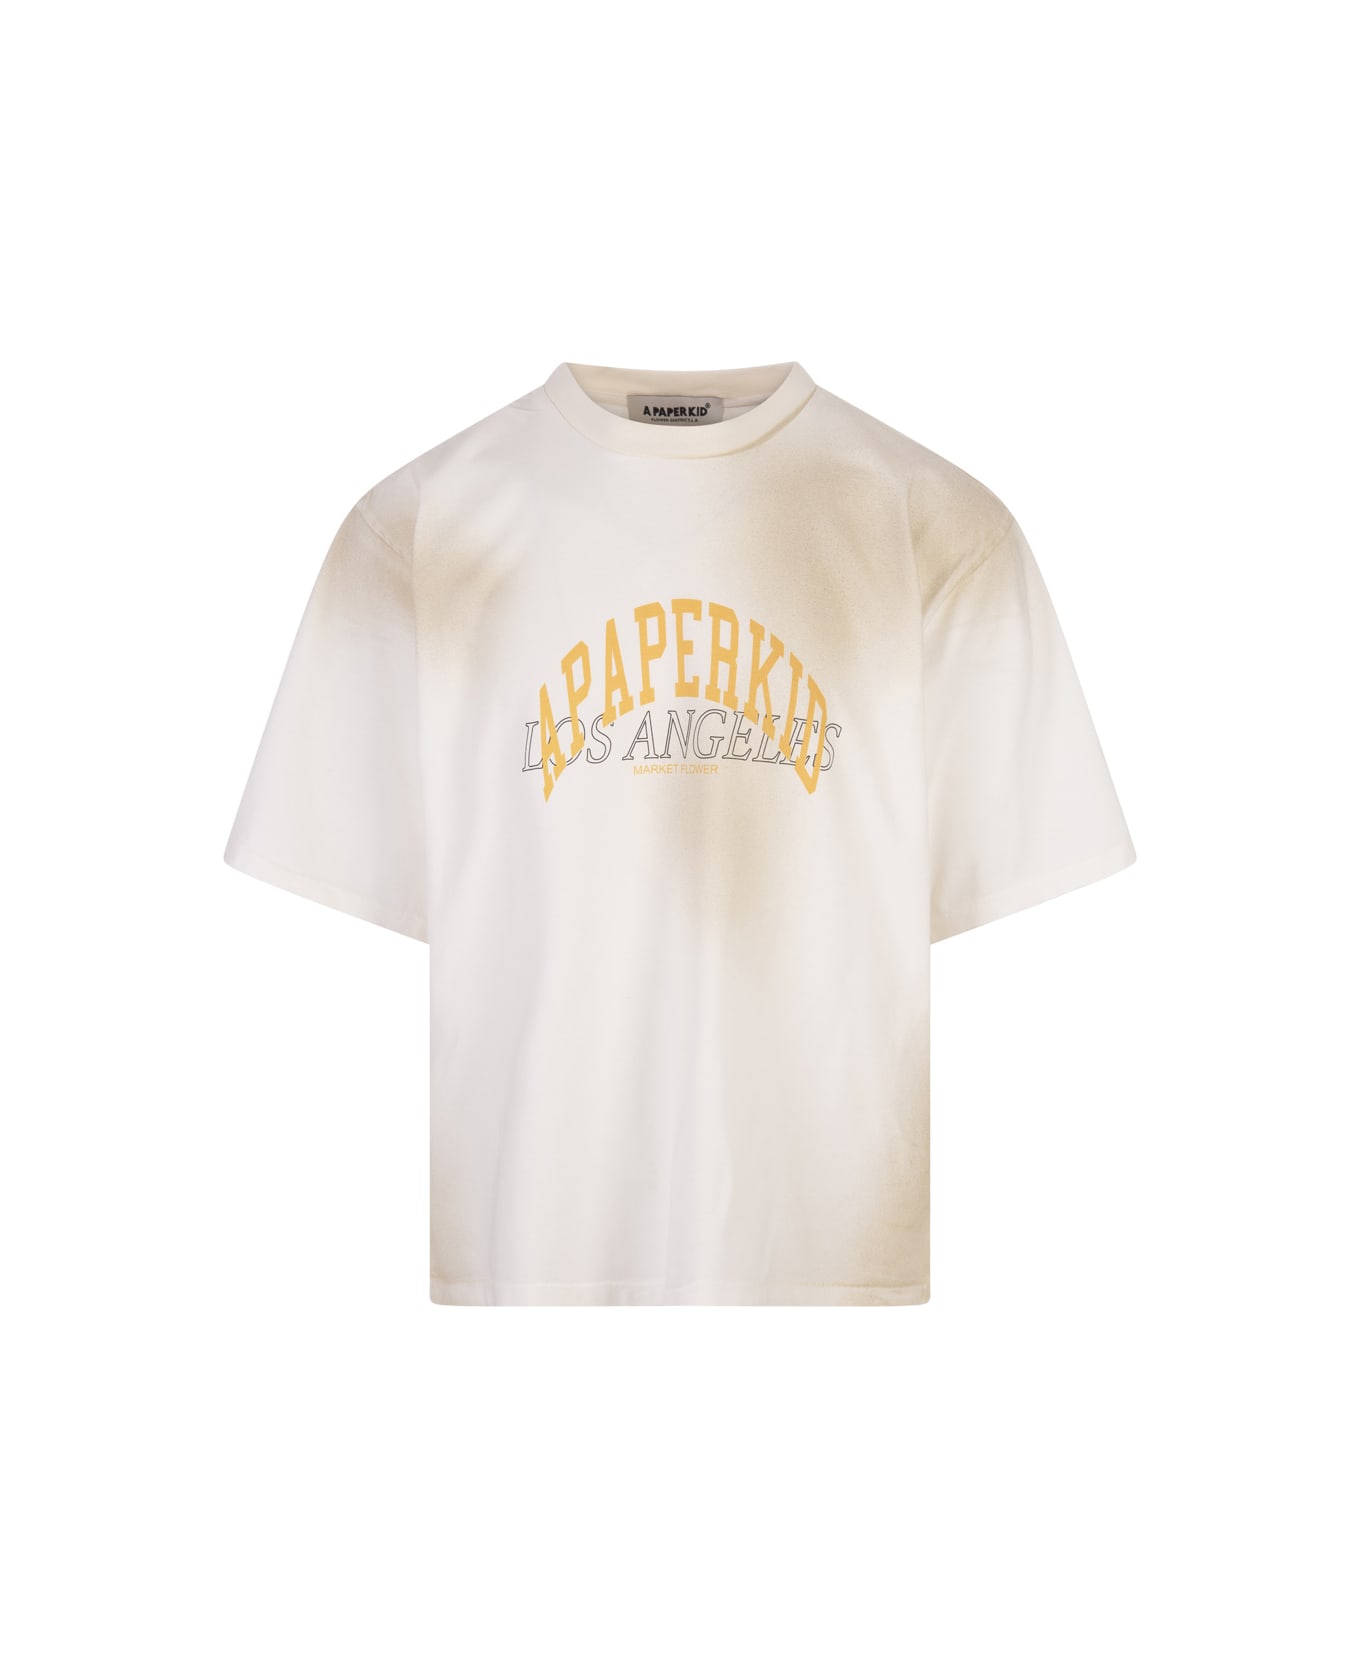 A Paper Kid White T-shirt With Washed Effect And Overlapped Prints - White Tシャツ